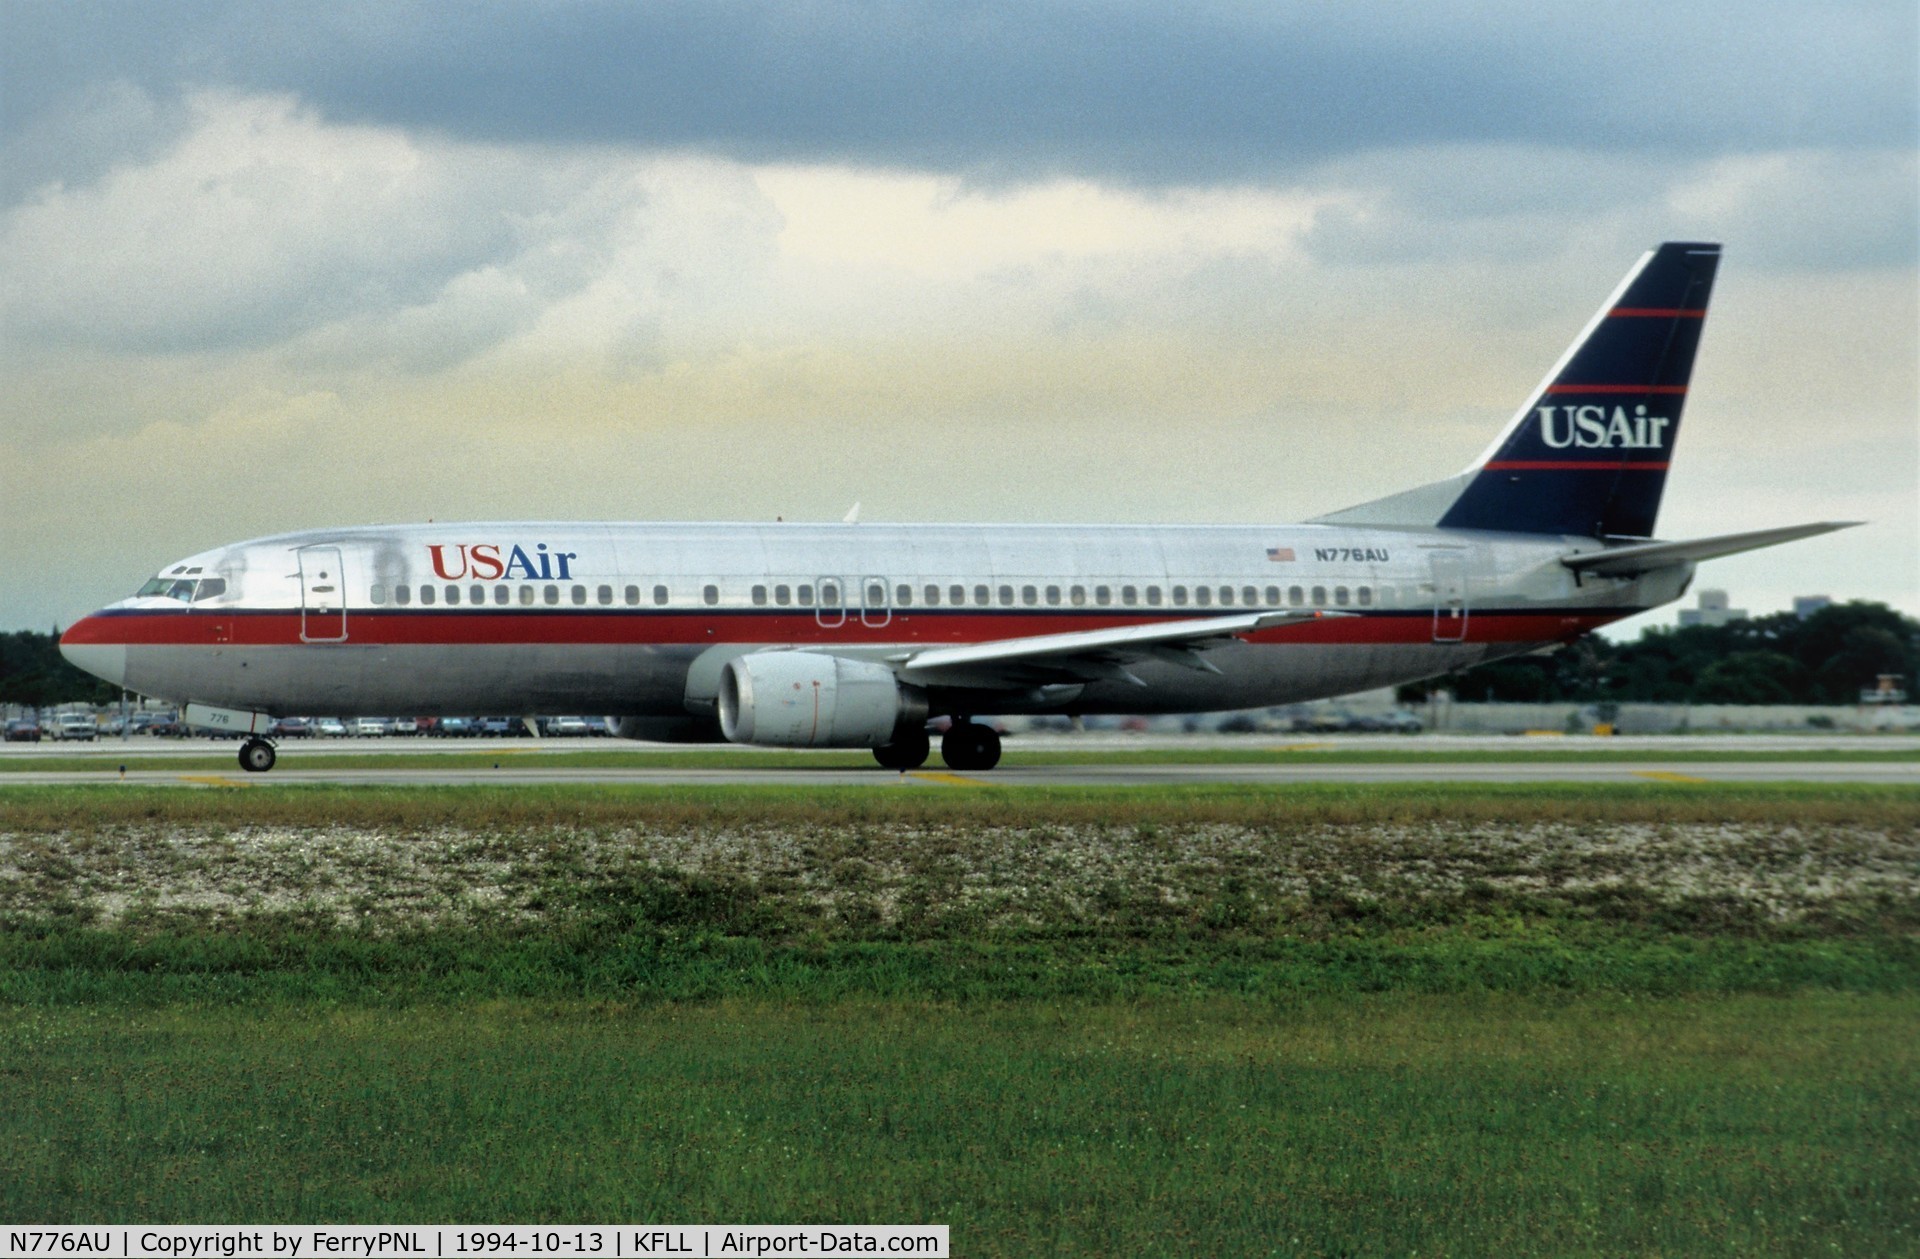 N776AU, 1990 Boeing 737-4B7 C/N 24934, USAir B734, spent its whole life with US and was wfu 2013.